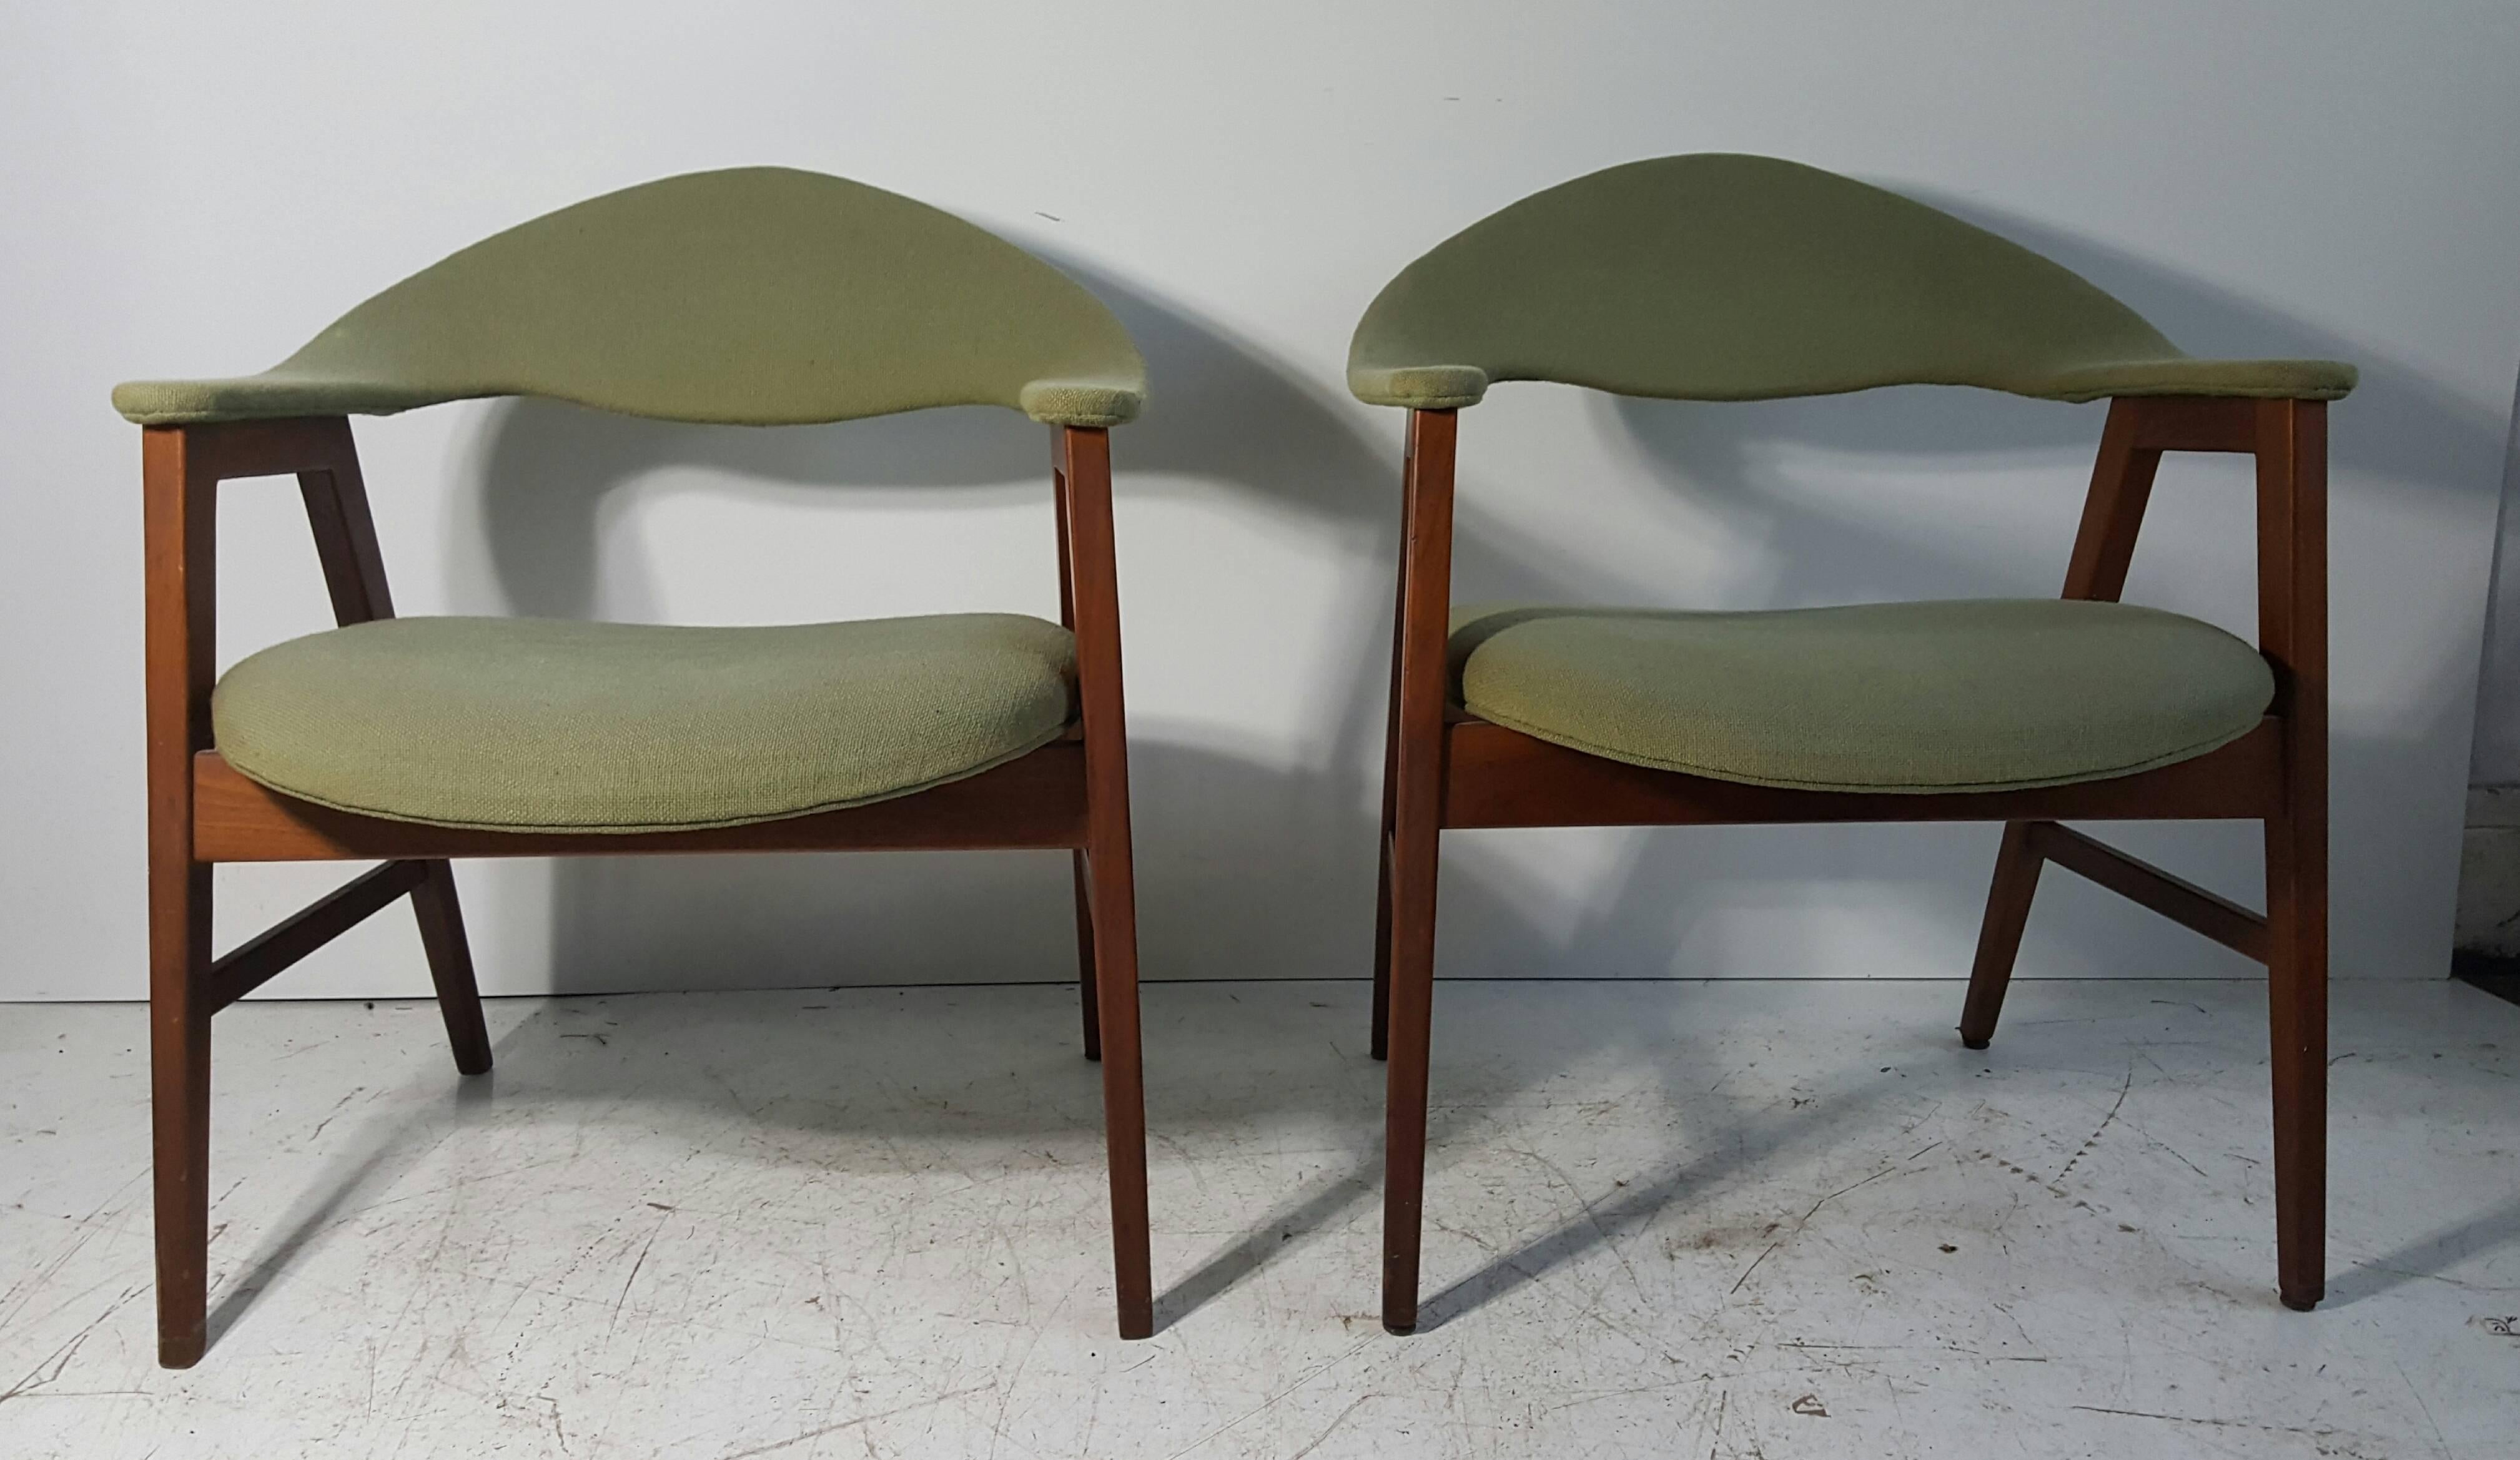 Classic pair Danish modern armchairs, teakwood frames and upholstery. Stunning lines, design... retains original green wool fabric, usable but would be fabulous reupholstered. Extremely comfortable.